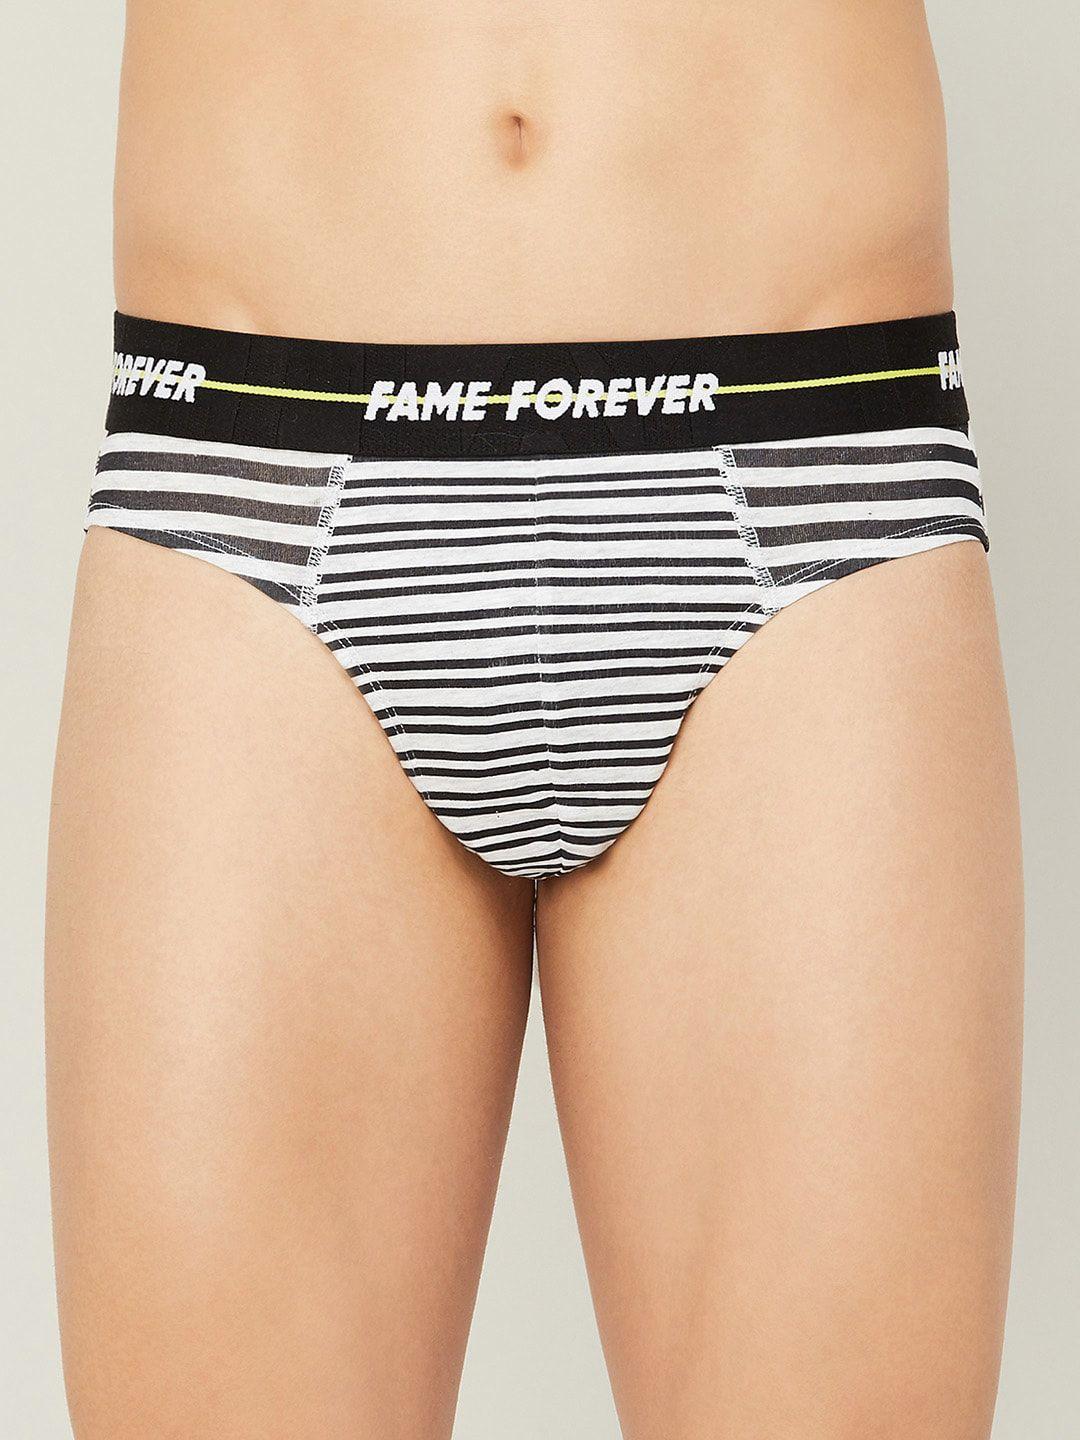 fame-forever-by-lifestyle-men-striped-cotton-basic-briefs